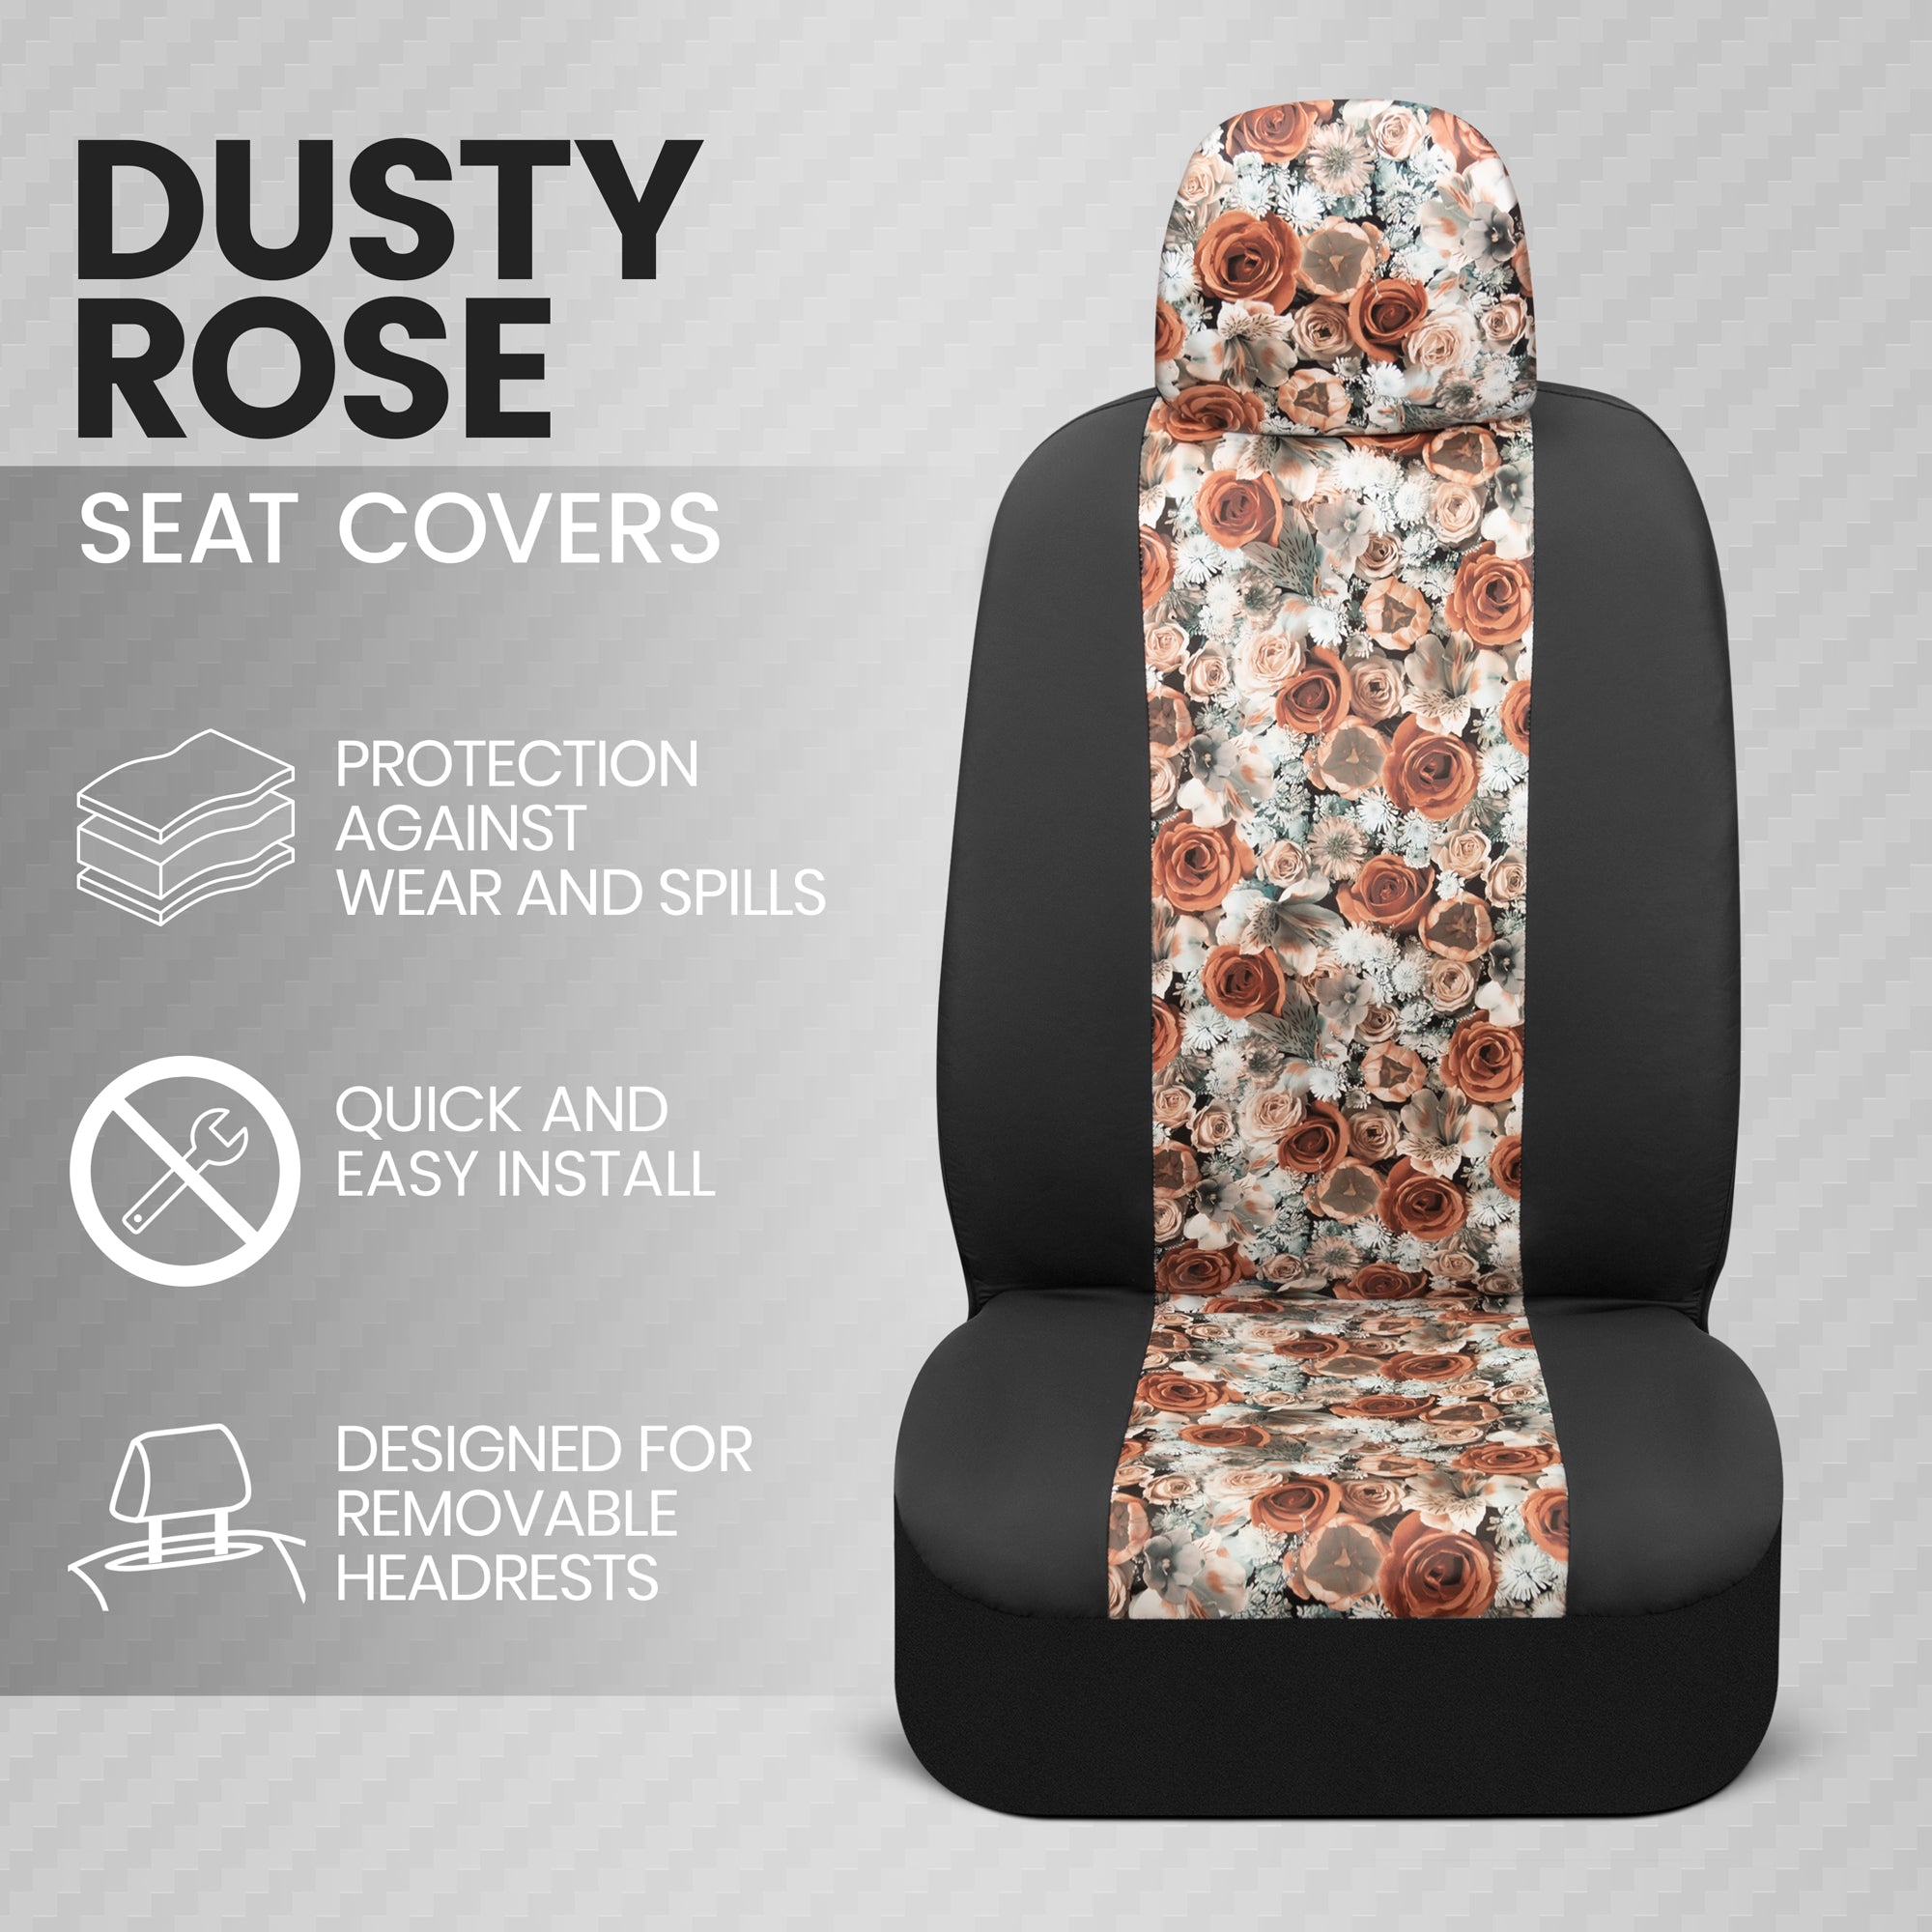 BDK Dusty Rose Floral Faux Leather Car Seat Covers for Front Seats, 2 Pack – Flower Pattern Front Seat Cover Set, Sideless Design for Easy Installation, Fits Most Car Truck Van and SUV